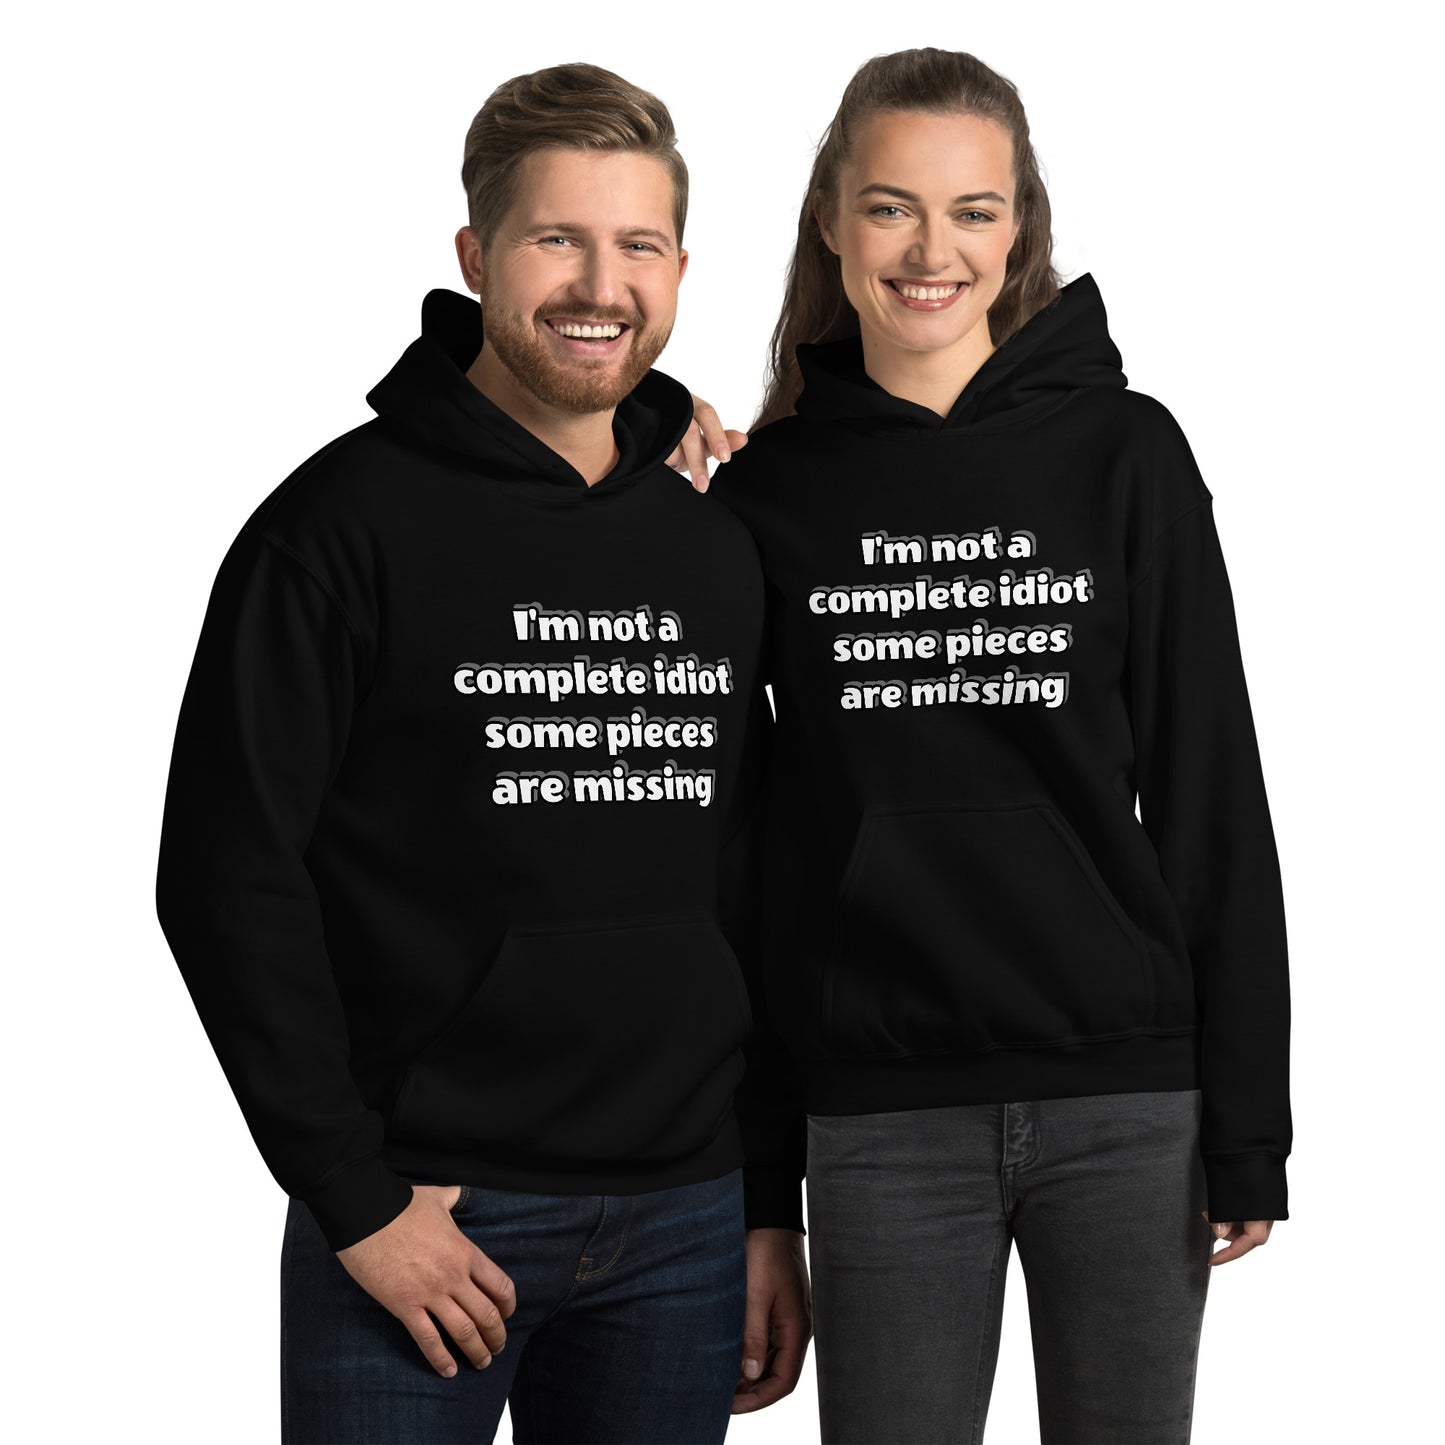 Men and women with black hoodie with text “I’m not a complete idiot, some pieces are missing”